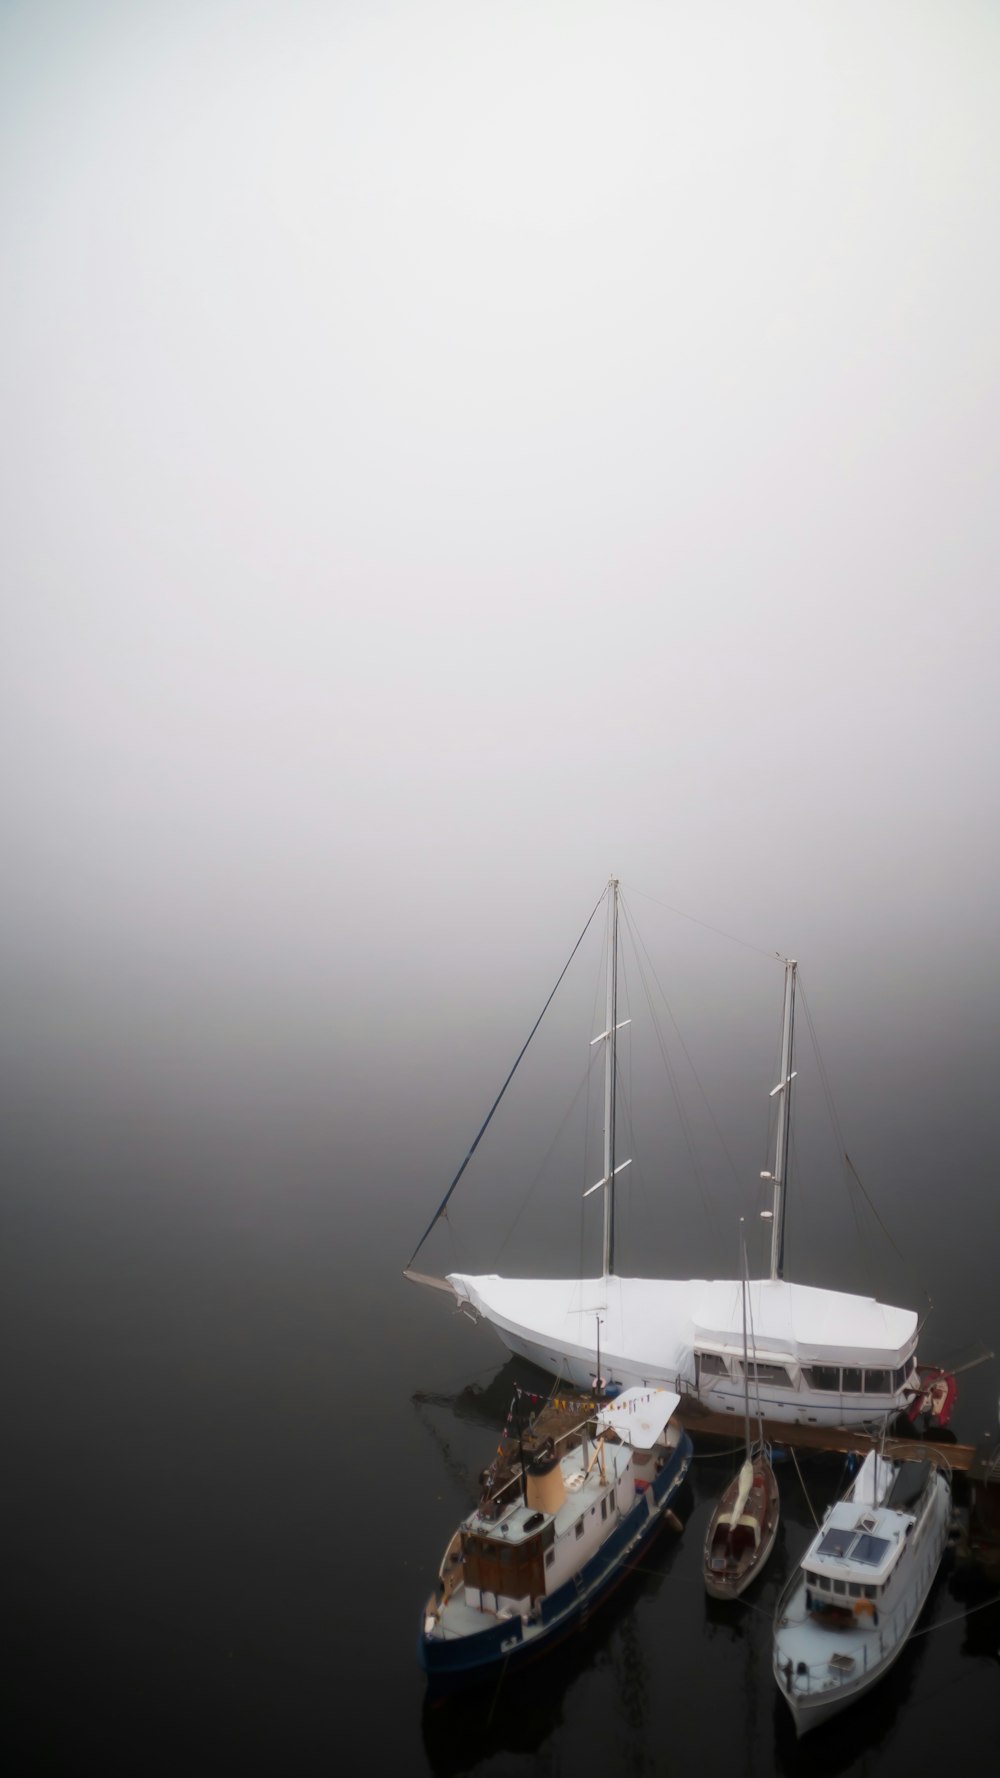 white sail boat on body of water